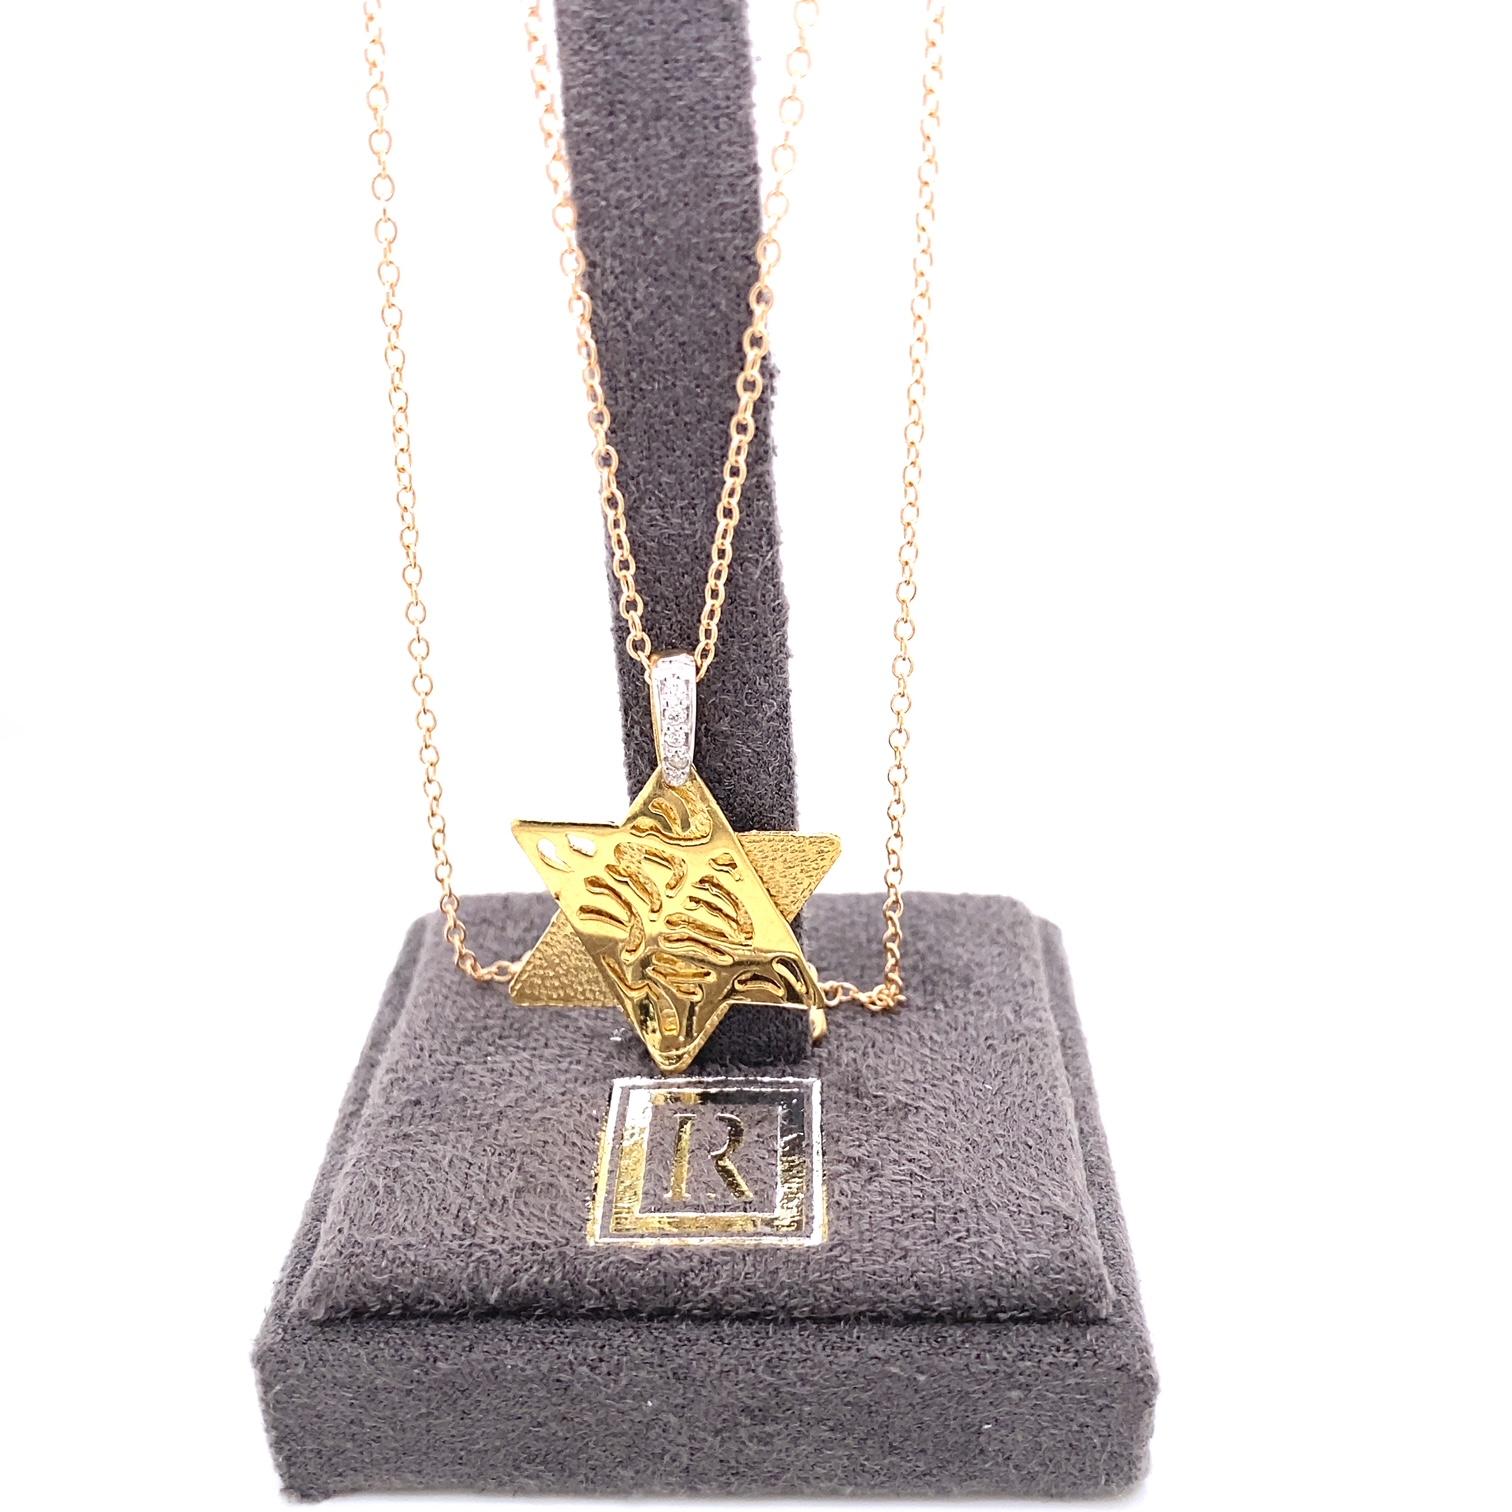 14 Karat Yellow Gold Hand-Crafted Polish and Texture-Finished Two-Disk Star of David Shema Yisrael Pendant, Accented with 0.04 Carats of Pave Set Diamonds, Sliding on a 16